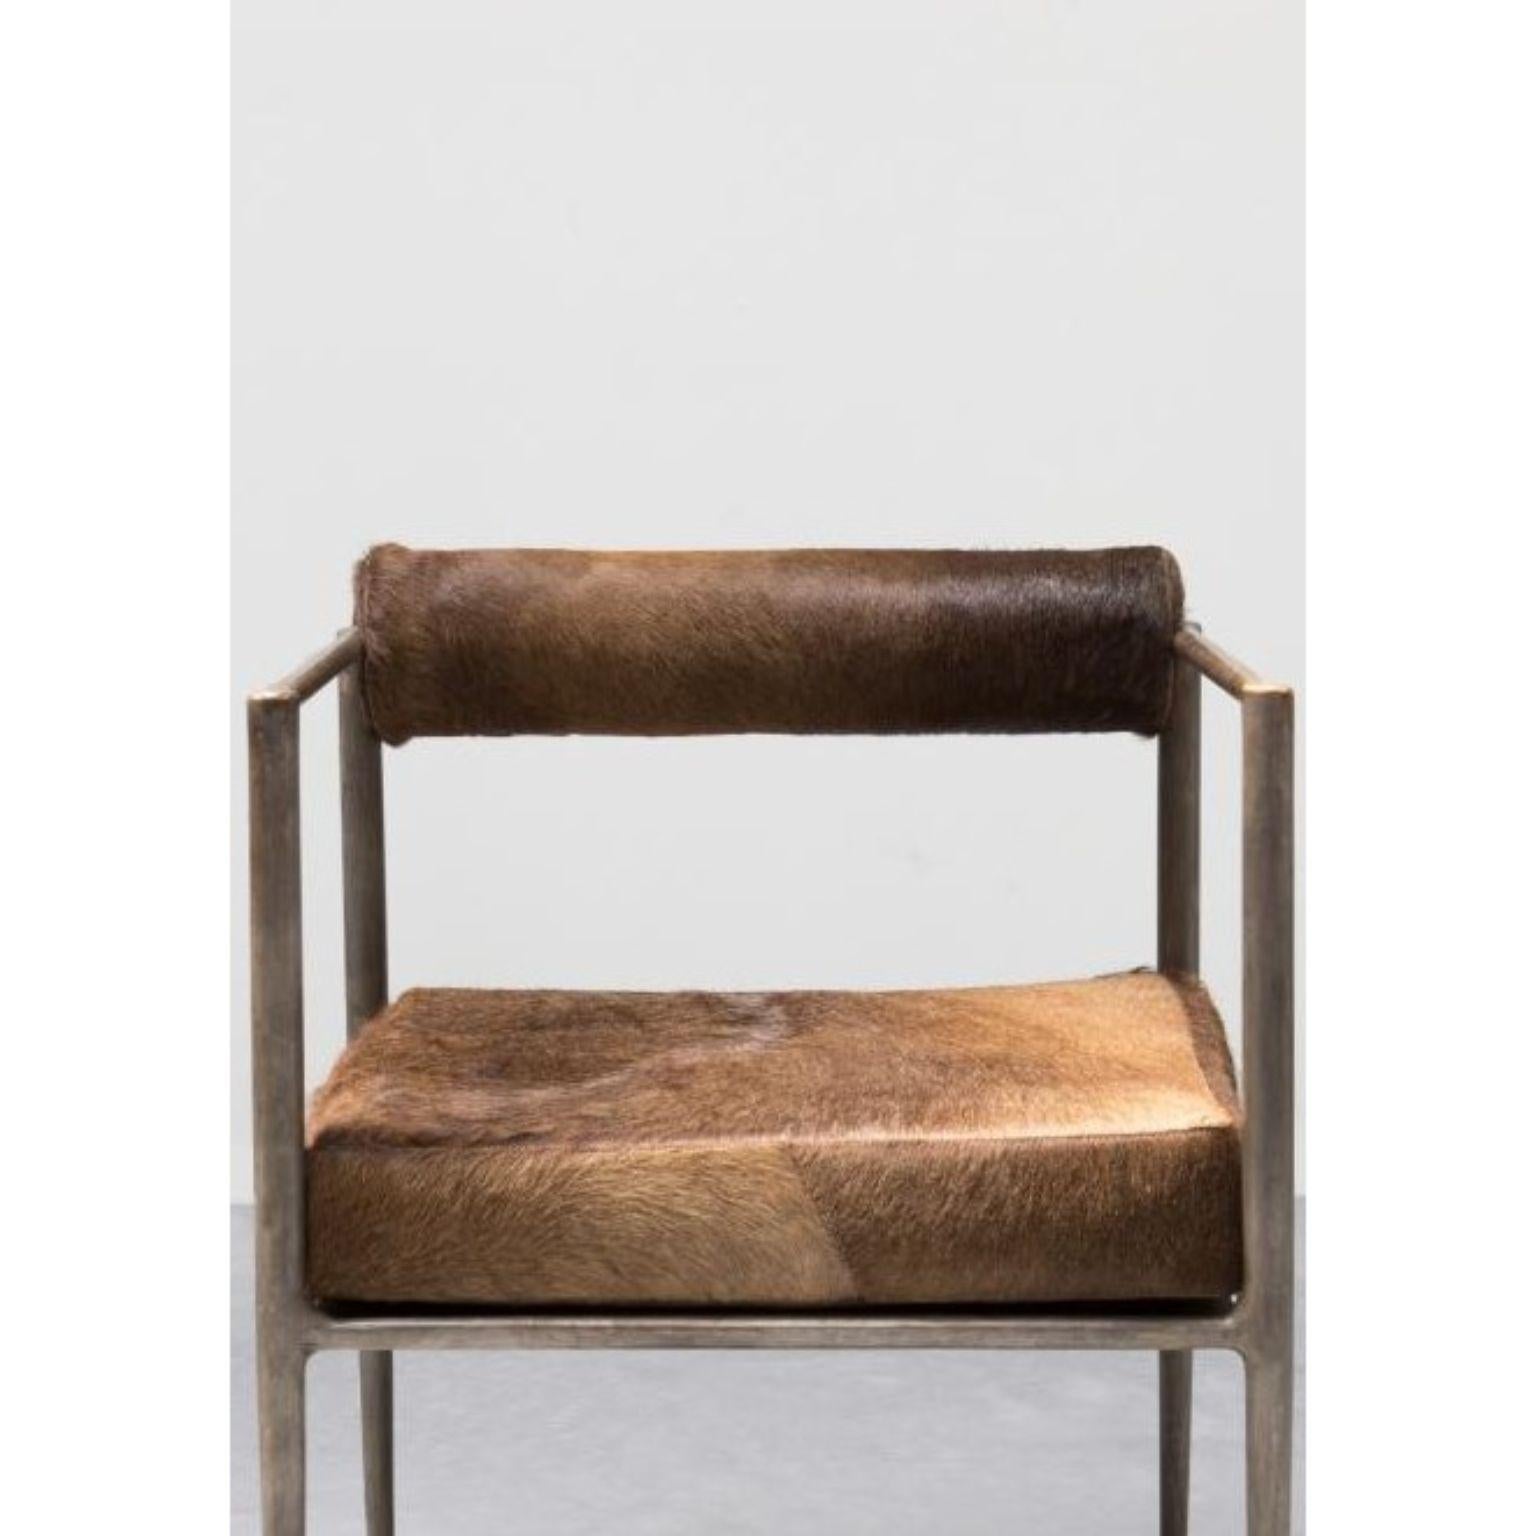 Square Alchemy chair by Rick Owens.
2015
Dimensions: L 60 x W 60 x H 76 cm
Materials: Bronze, camel skin
Weight: 40 kg

Rick Owens is a California-born fashion and furniture has developed a unique style that he describes as “luxe